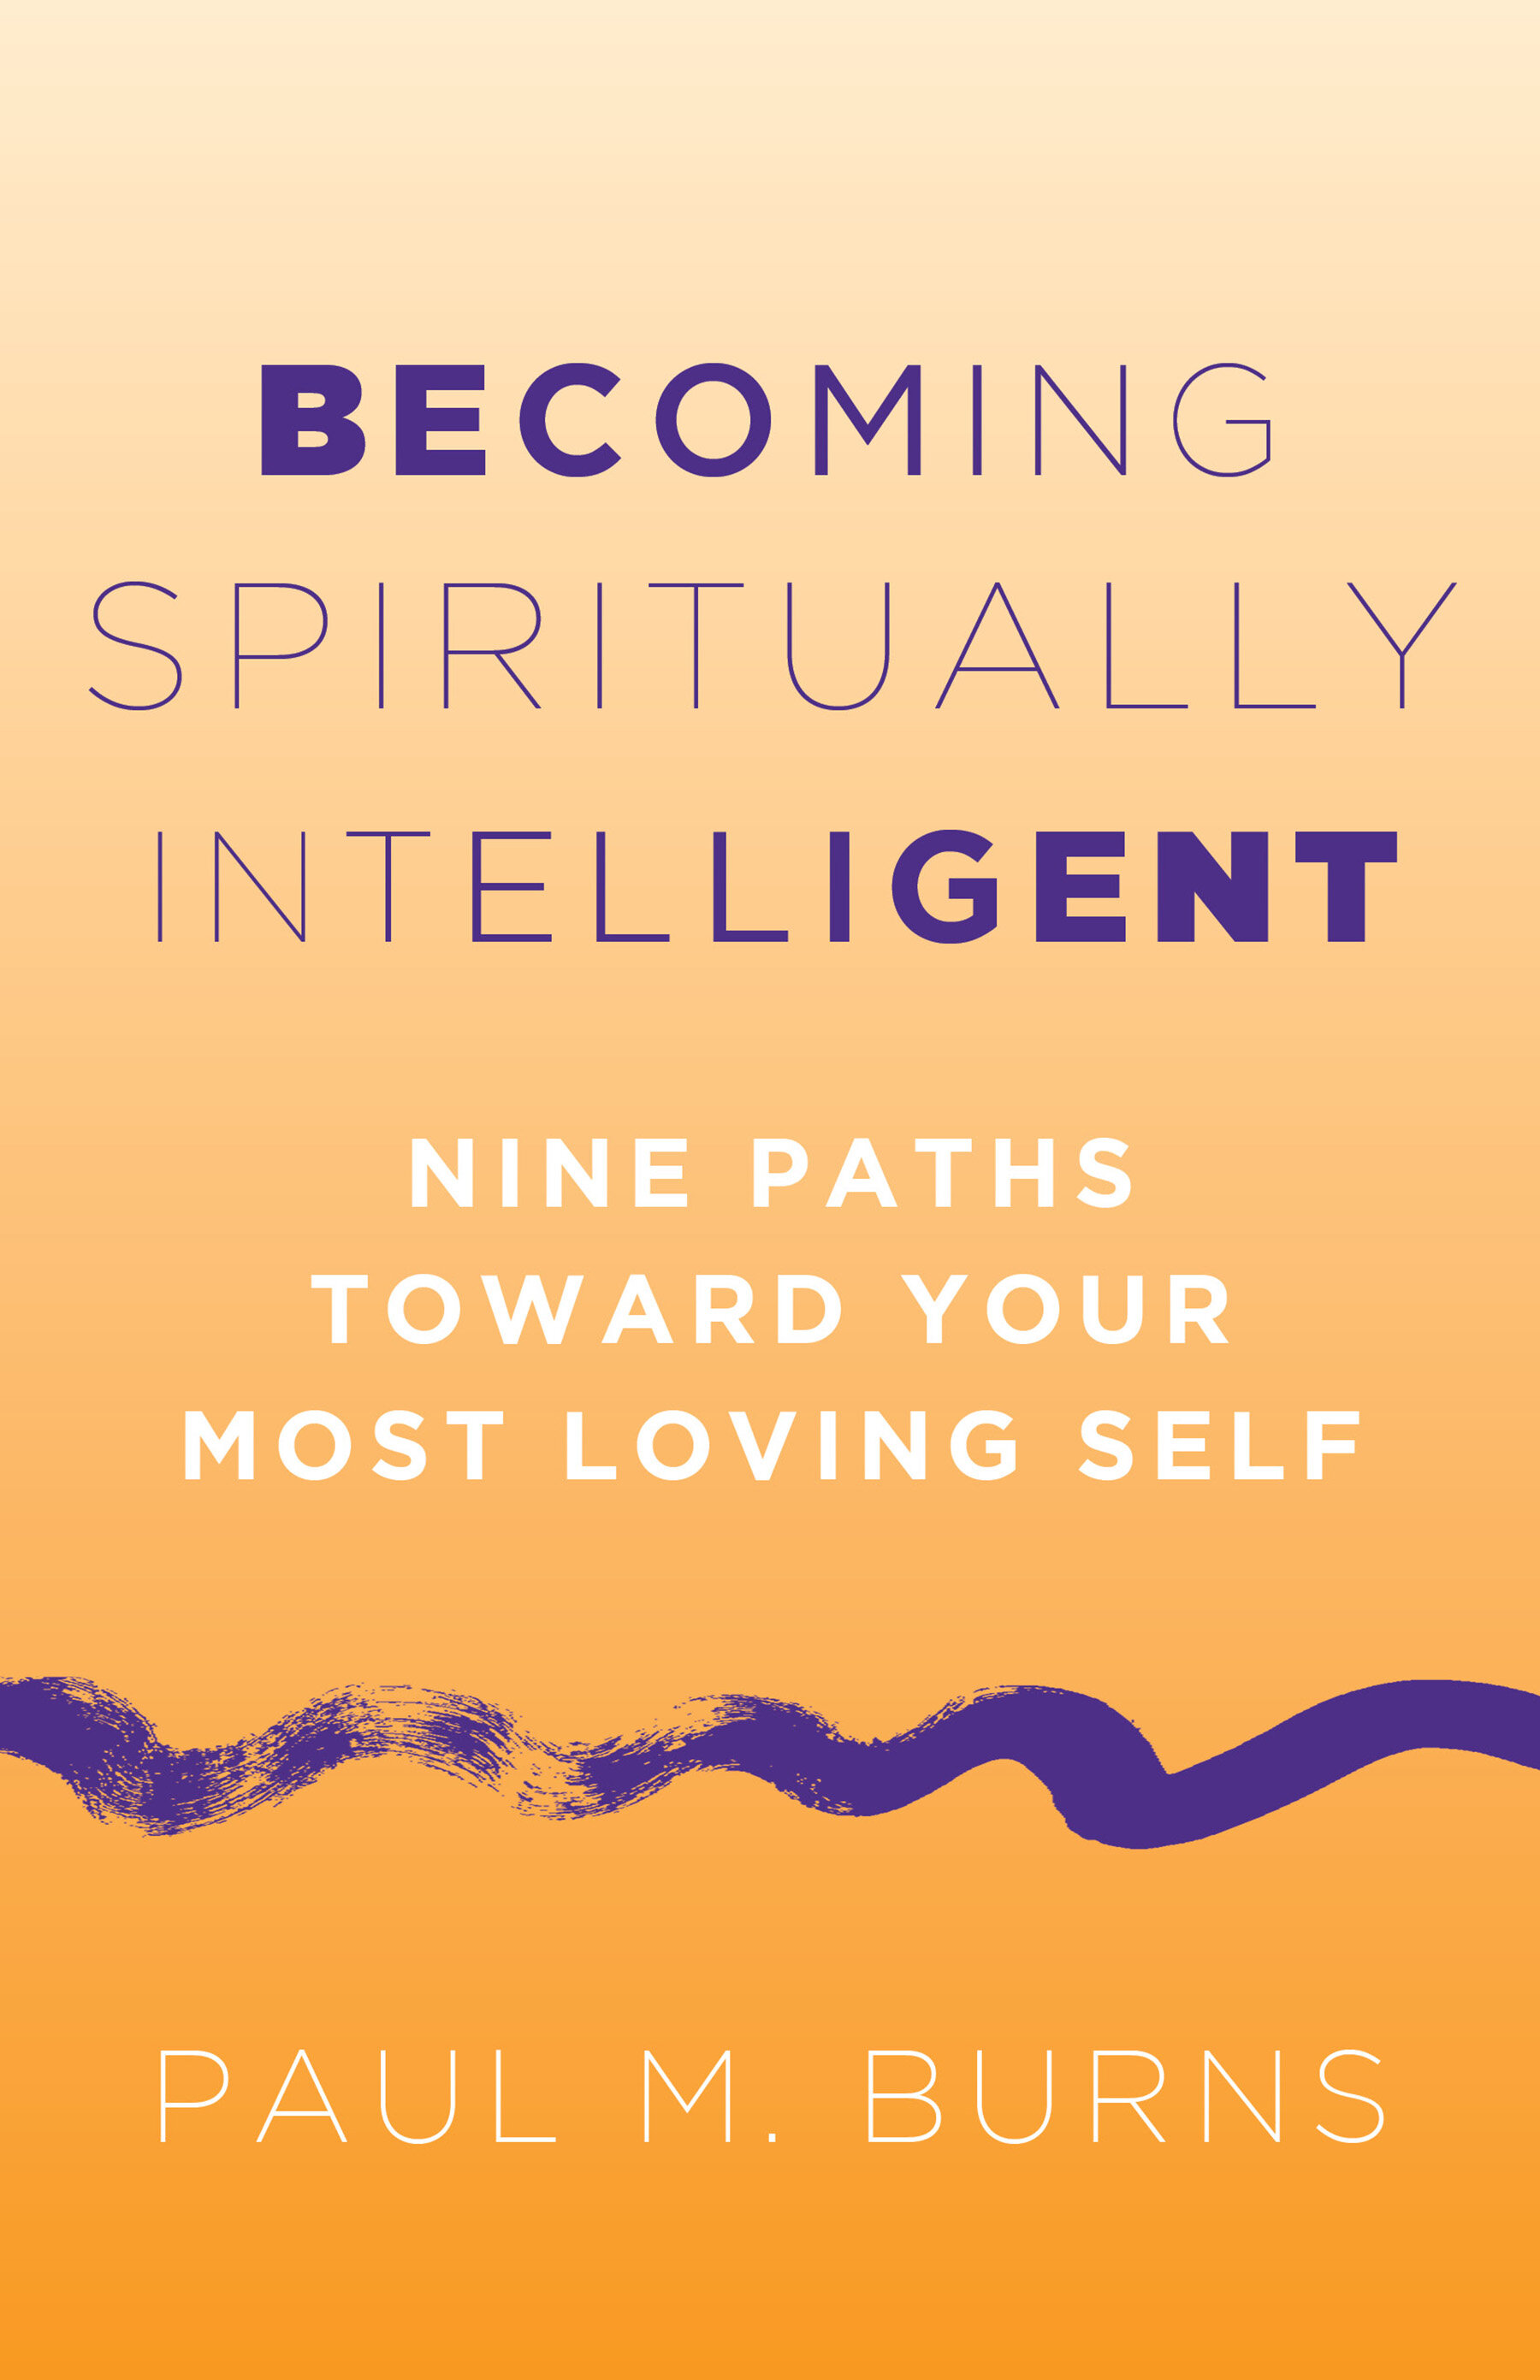 Becoming Spiritually Intelligent: Nine Paths toward Your Most Loving Self